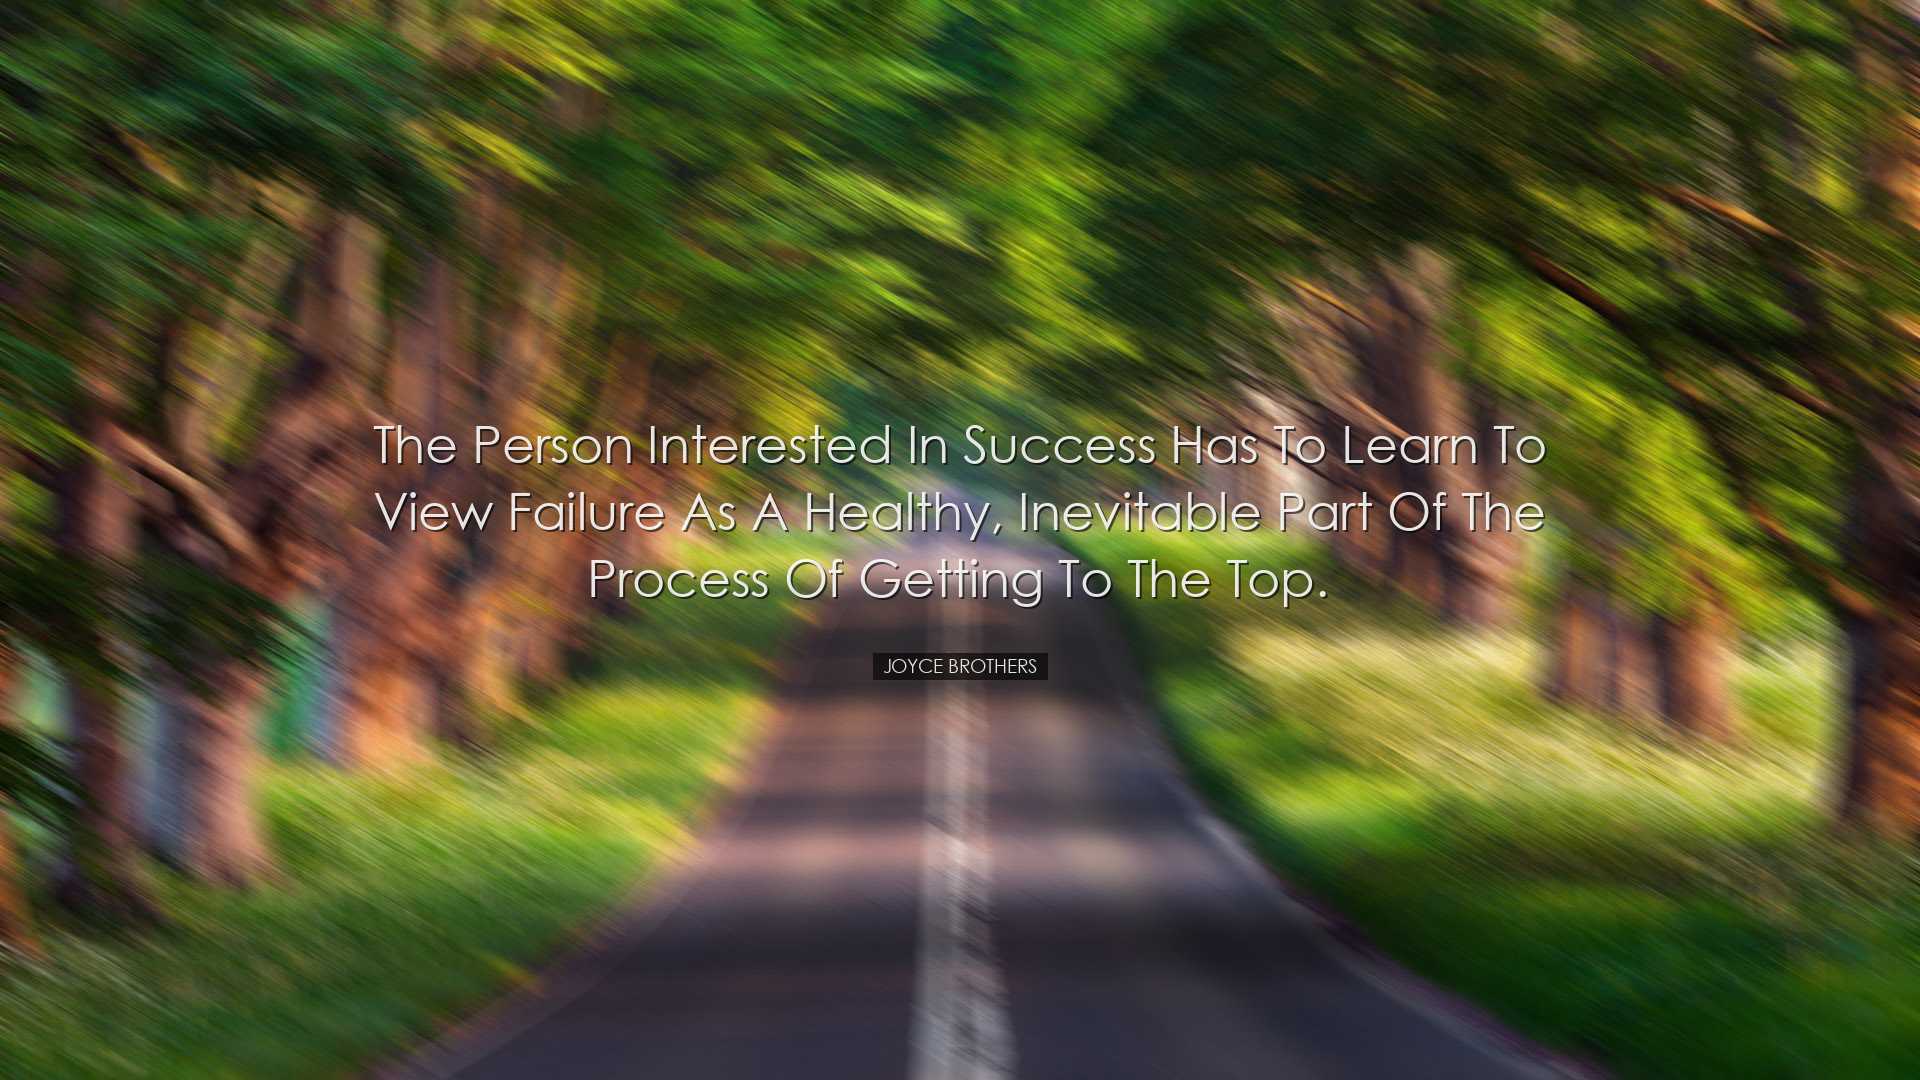 The person interested in success has to learn to view failure as a